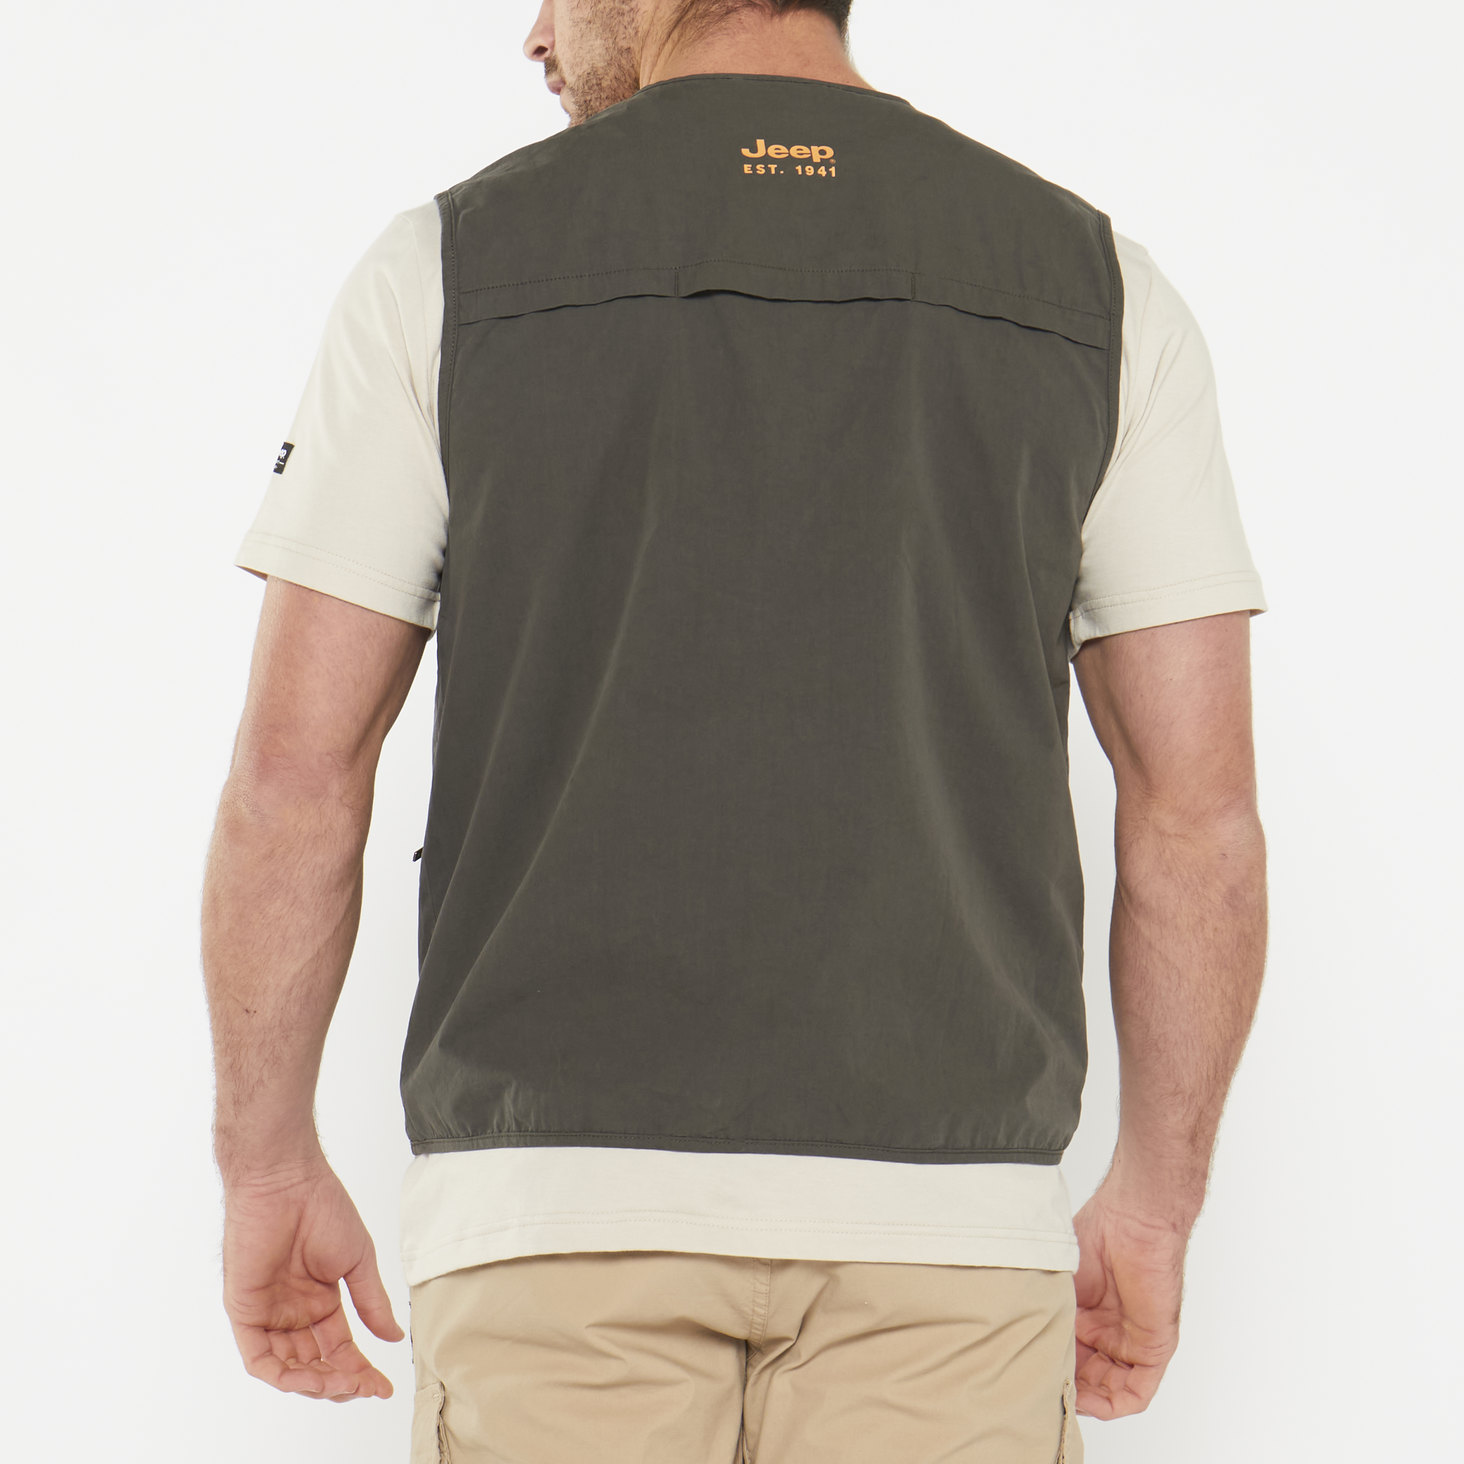 UTILITY VEST WITH CARGO POCKETS | Jeep